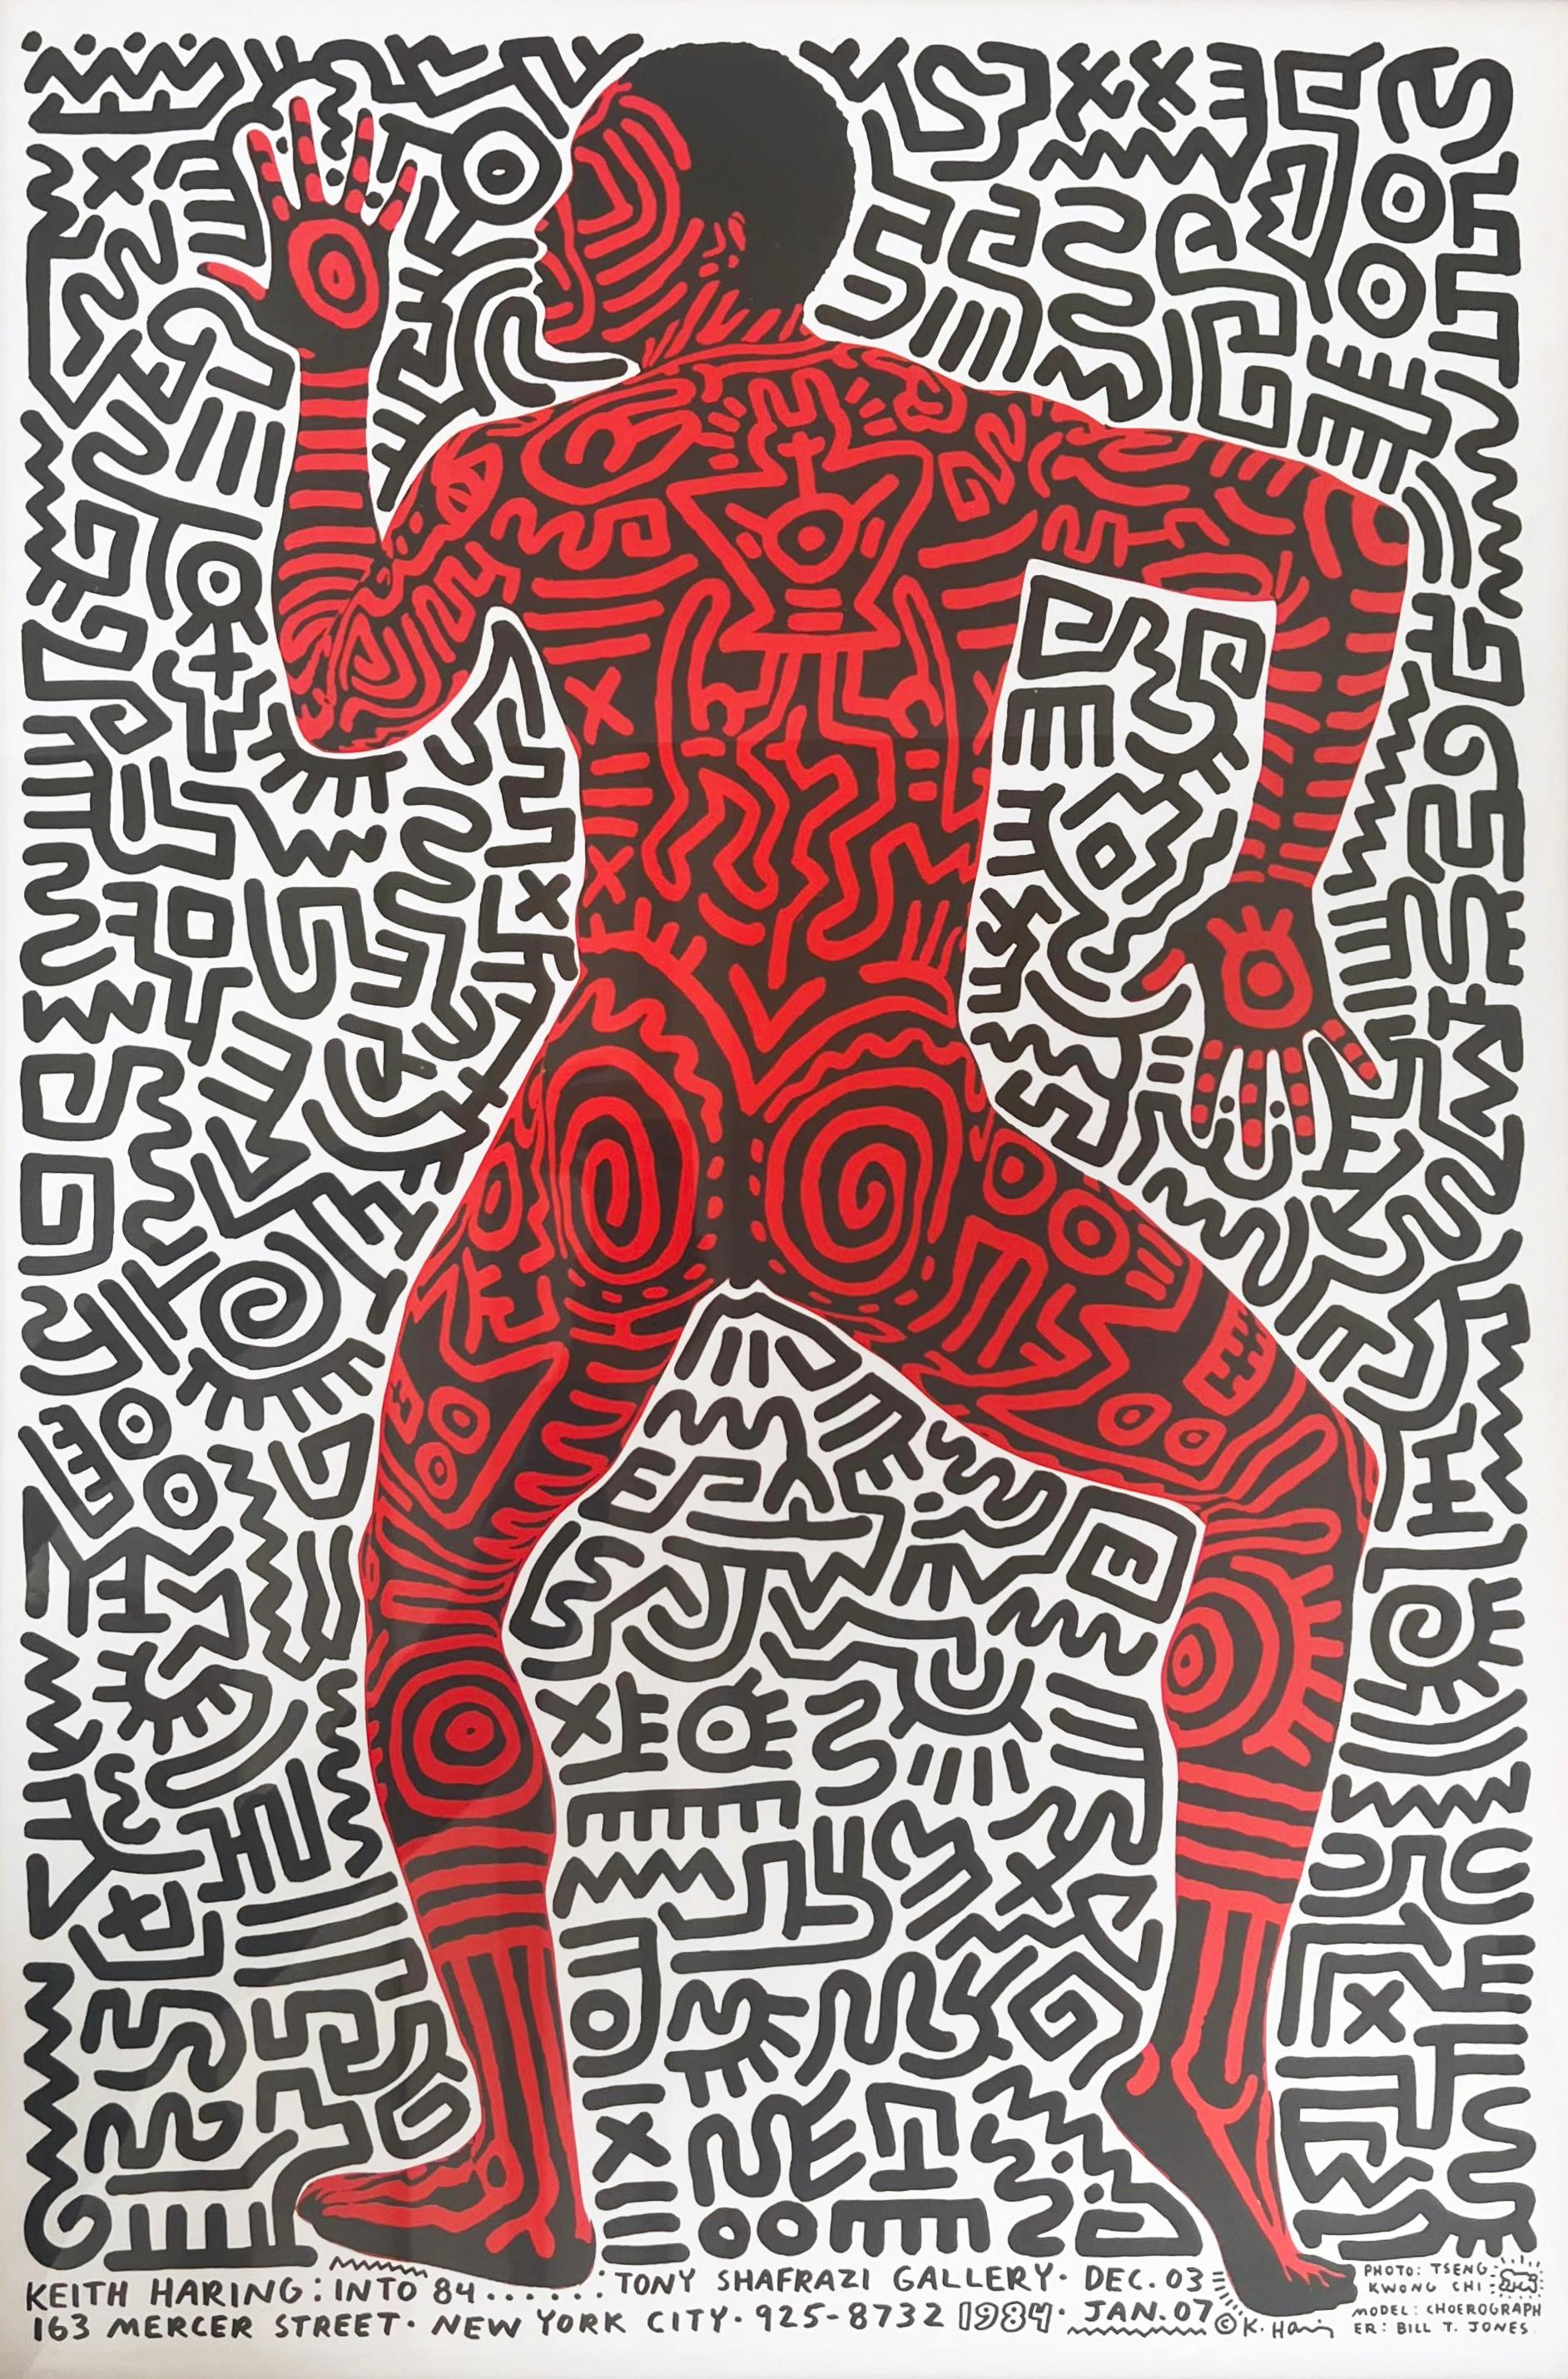 Keith Haring Into 84 poster (vintage Keith Haring)  1